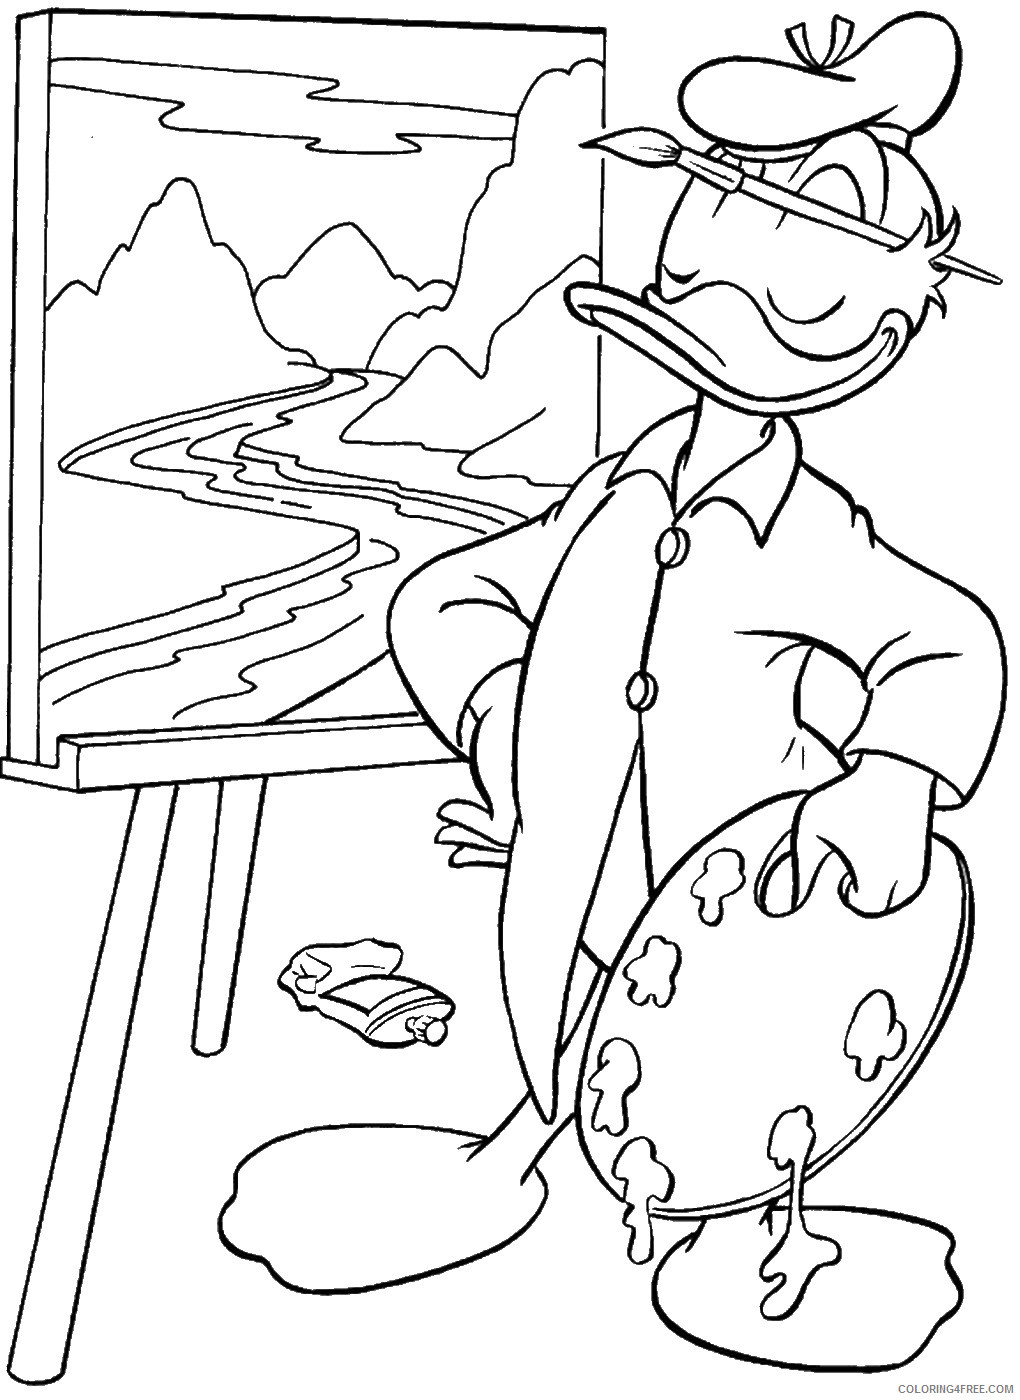 Donald Duck Coloring Pages Cartoons donald_41 Printable 2020 2524 Coloring4free